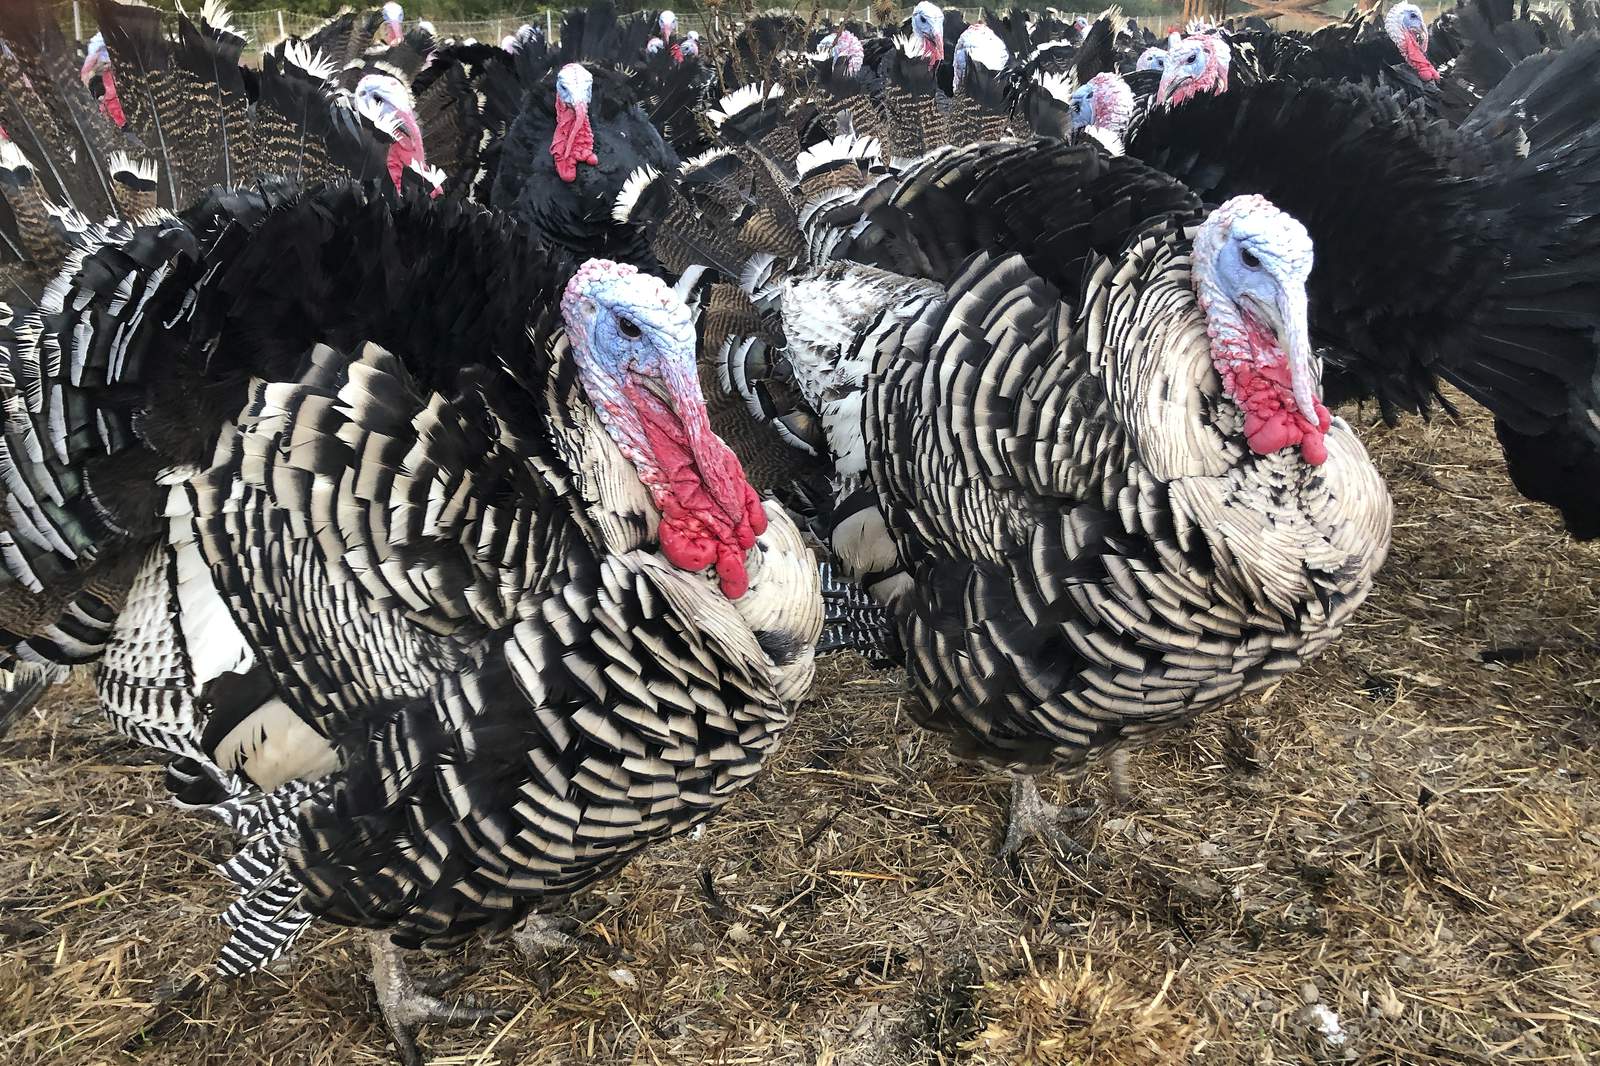 Thanksgiving feast or famine? Turkey industry left to guess